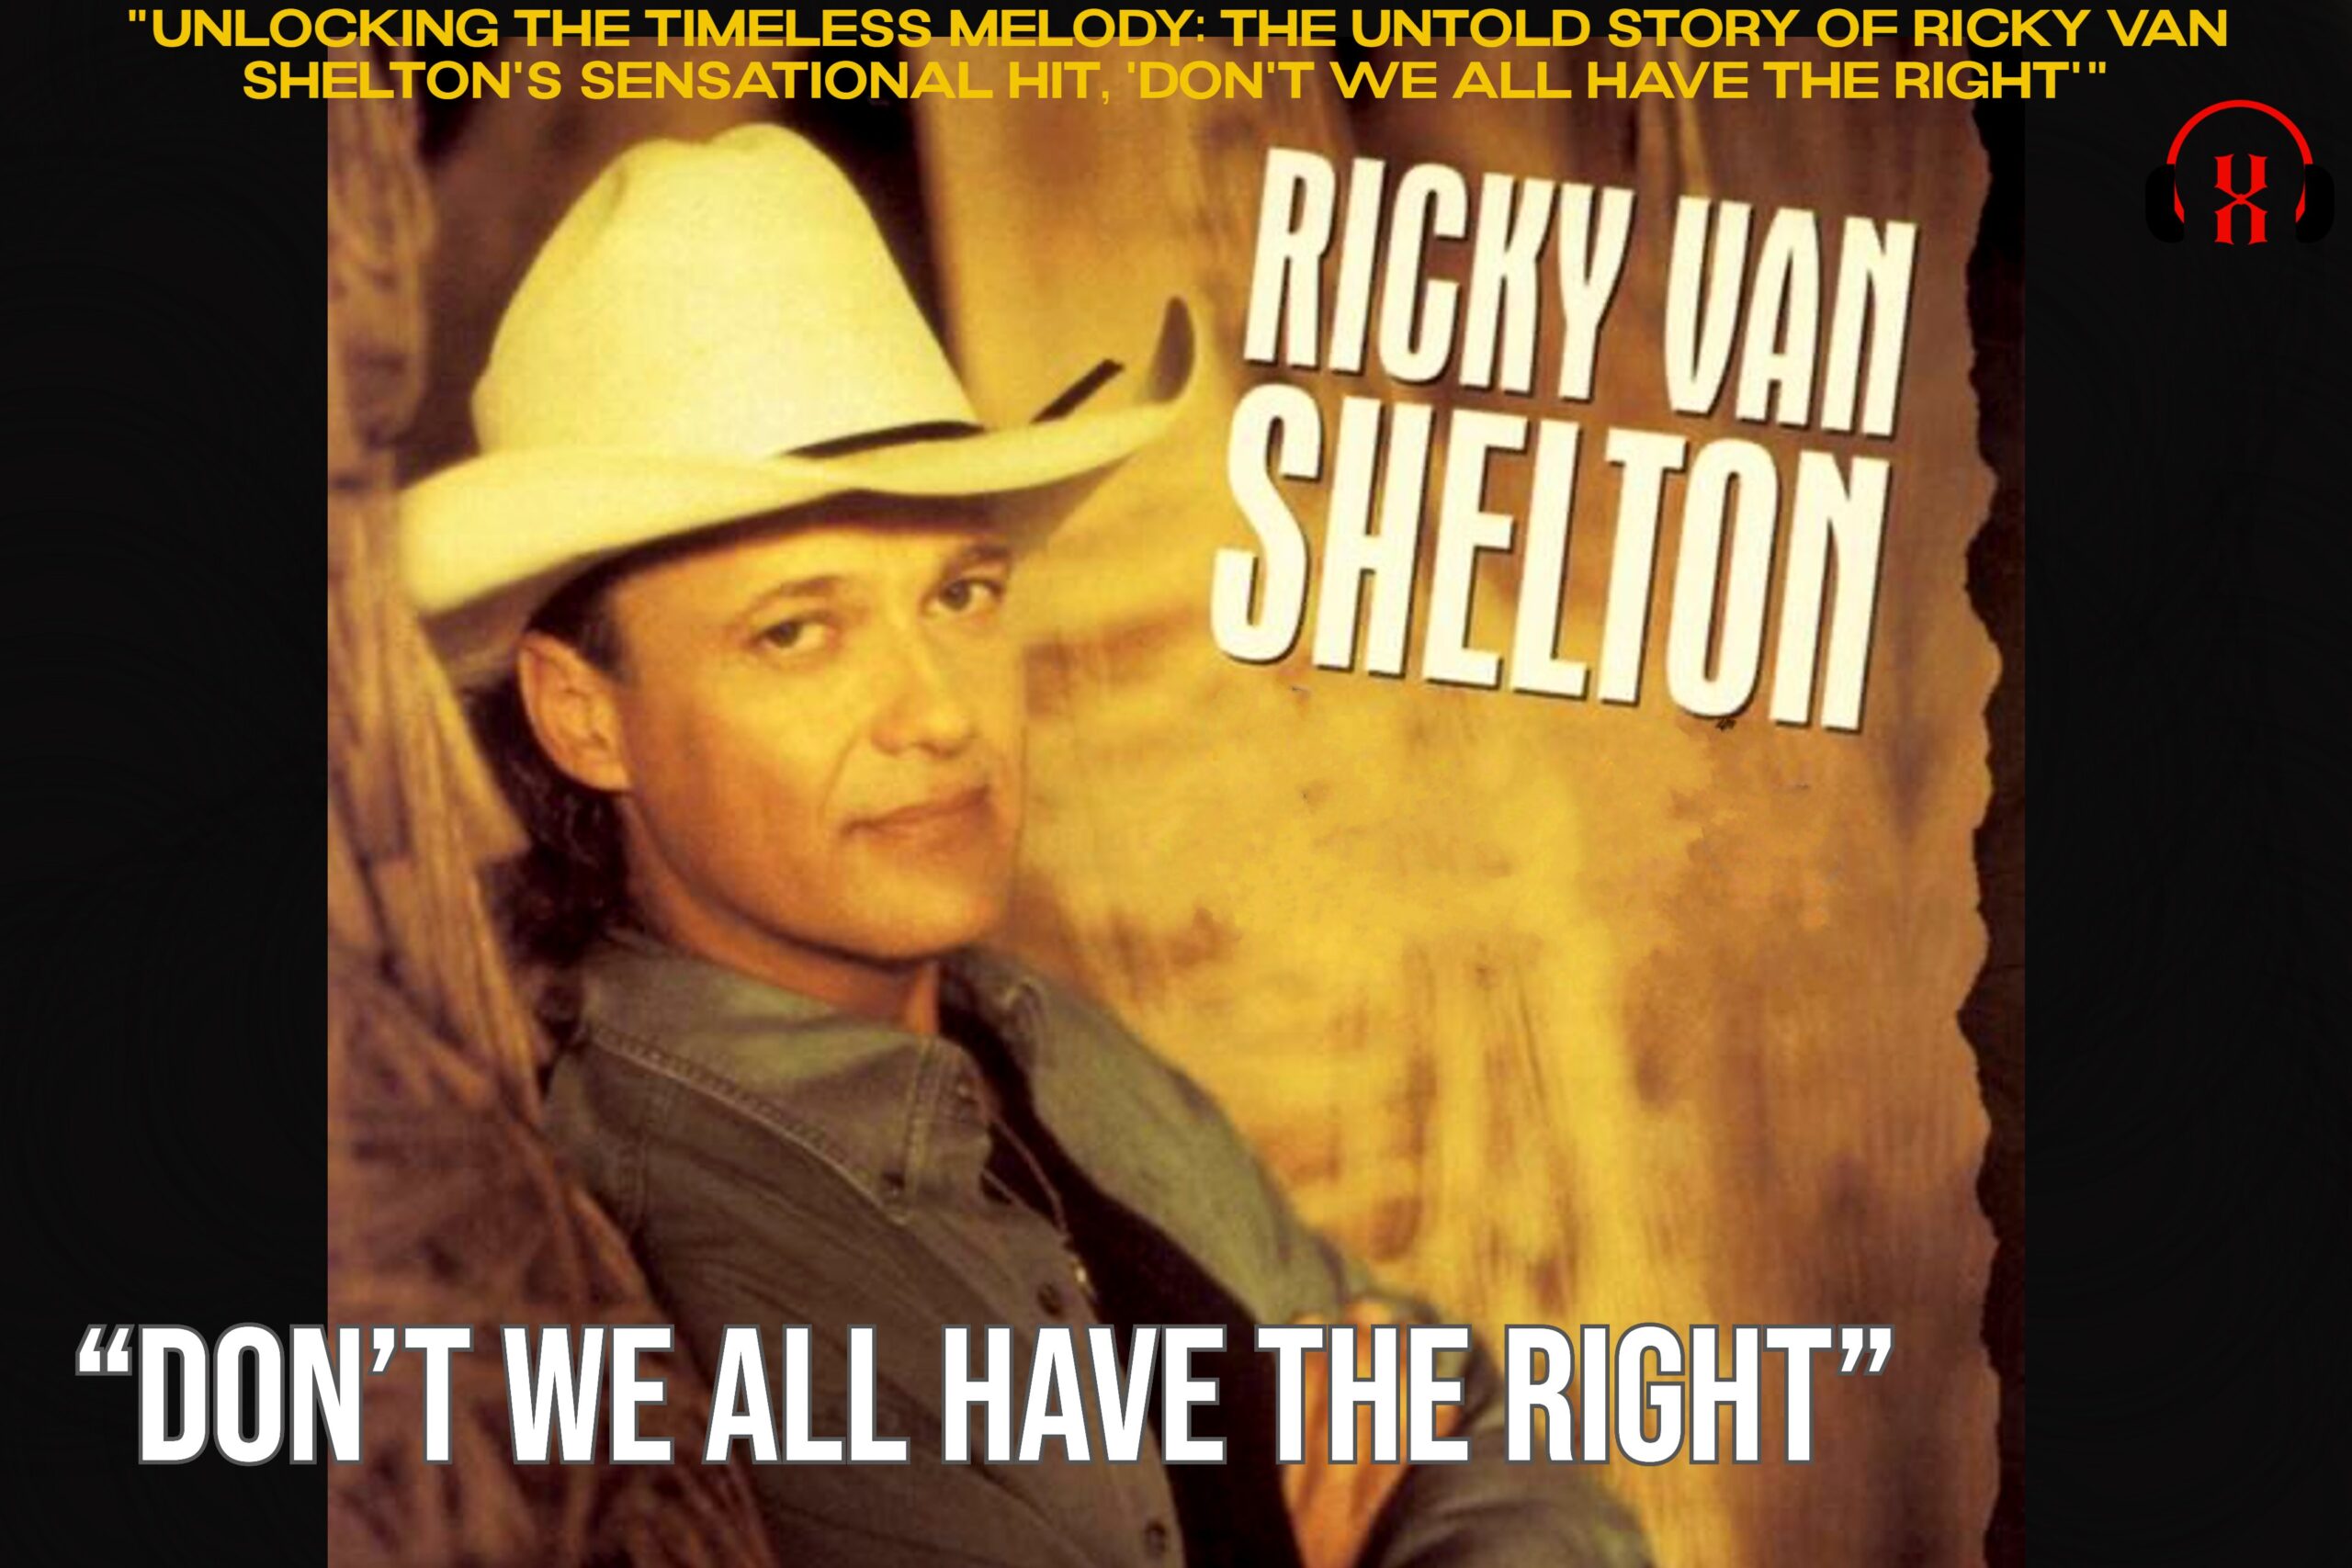 “Unlocking the Timeless Melody: The Untold Story of Ricky Van Shelton’s Sensational Hit, ‘Don’t We All Have the Right'”